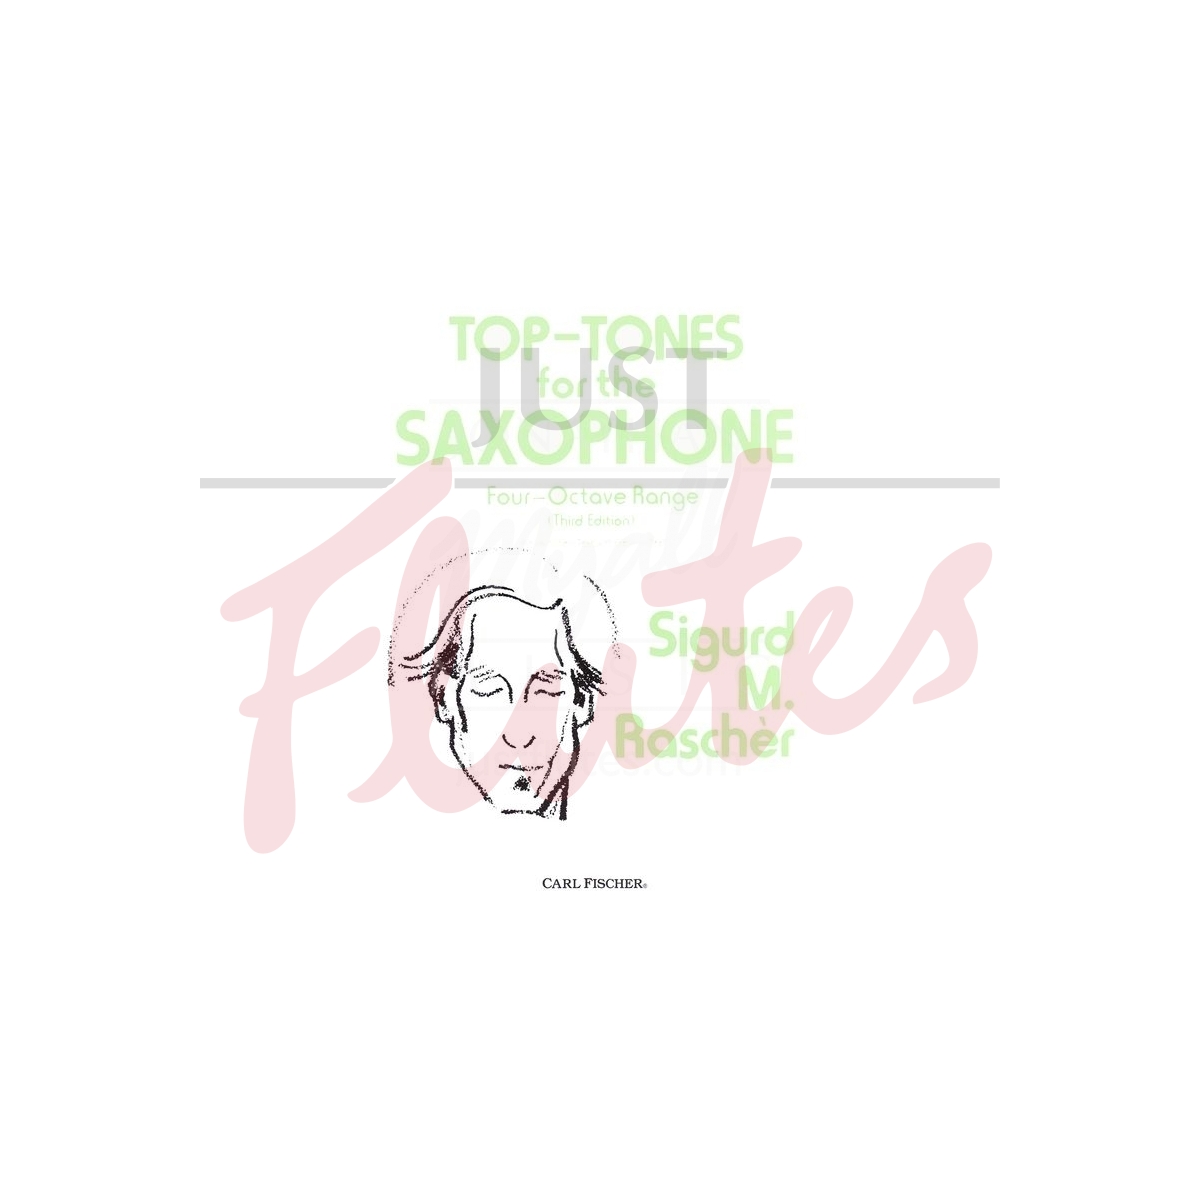 Top-Tones for the Saxophone (Four Octave Range - 3rd Edition)